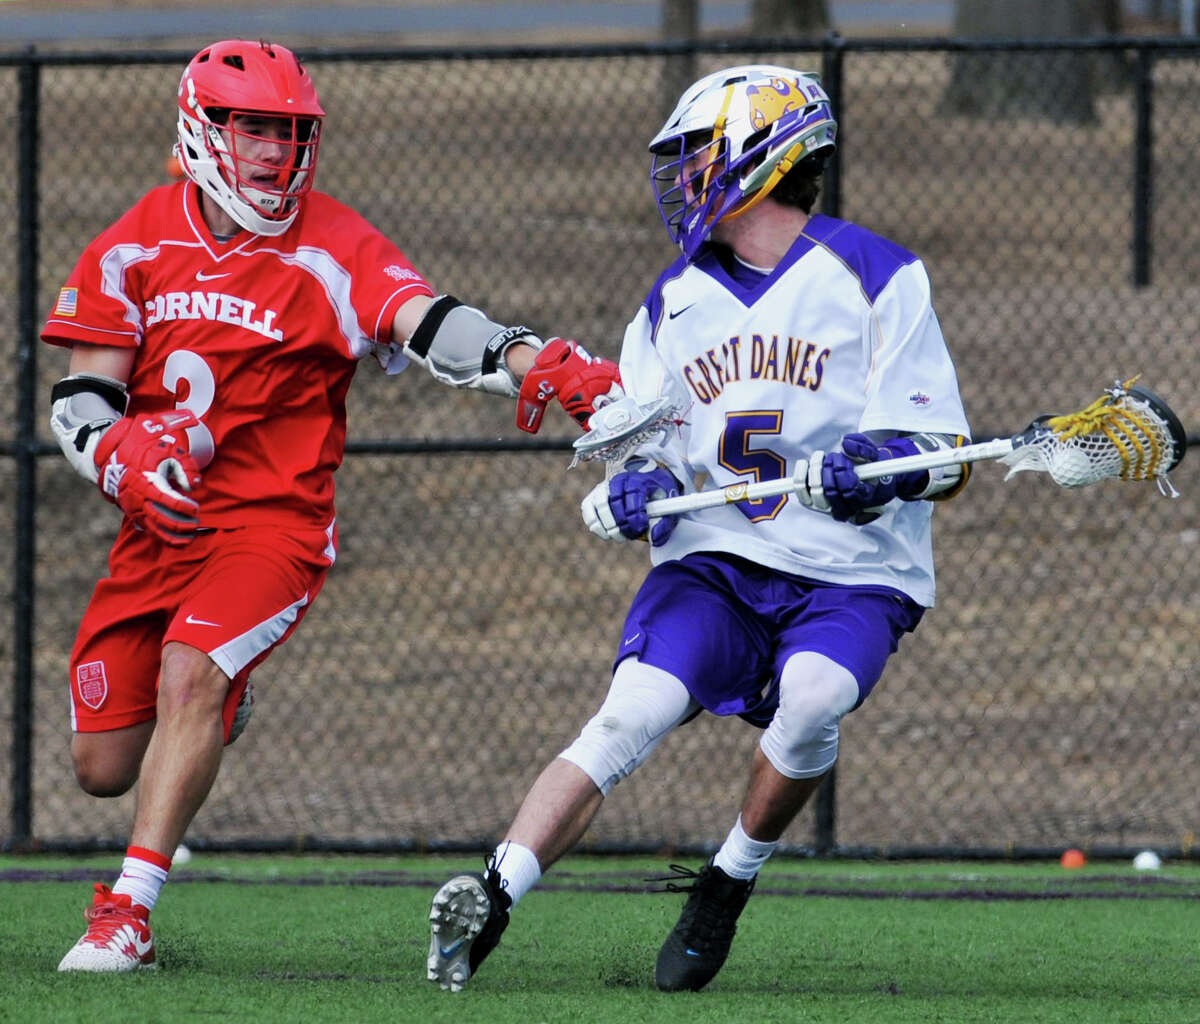 Connor Fields looks at his last line of Cornell University's defense before shooting and scoring the seventh goal of the Saturday, March 5, 2016, game on John Fallon's Field in University at Albany, Albany, N.Y. (Brittany Gregory / Special to the Times Union)